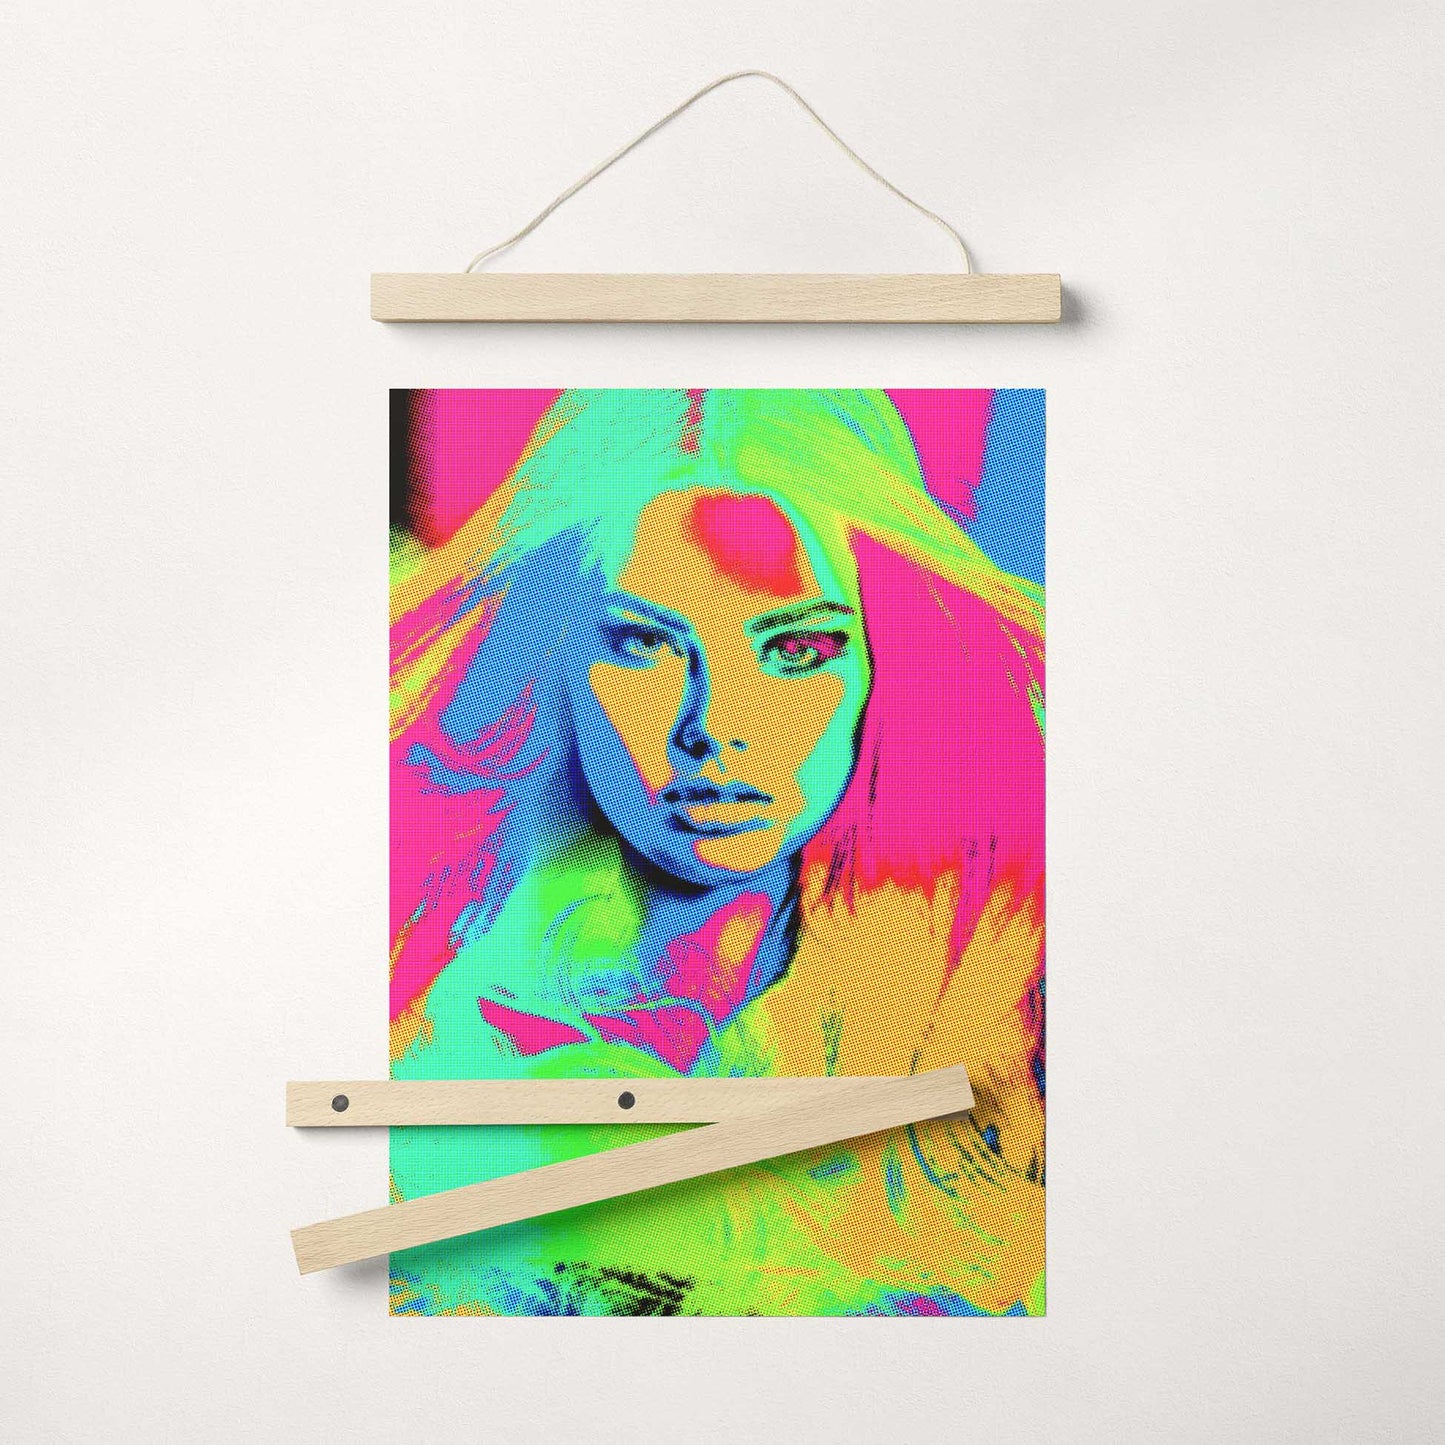 Add a touch of urban charm to your space with the Personalised Graffiti Street Art Poster Hanger. Its cool graffiti style and street art filter create a vibrant and dynamic wall art decor that stands out